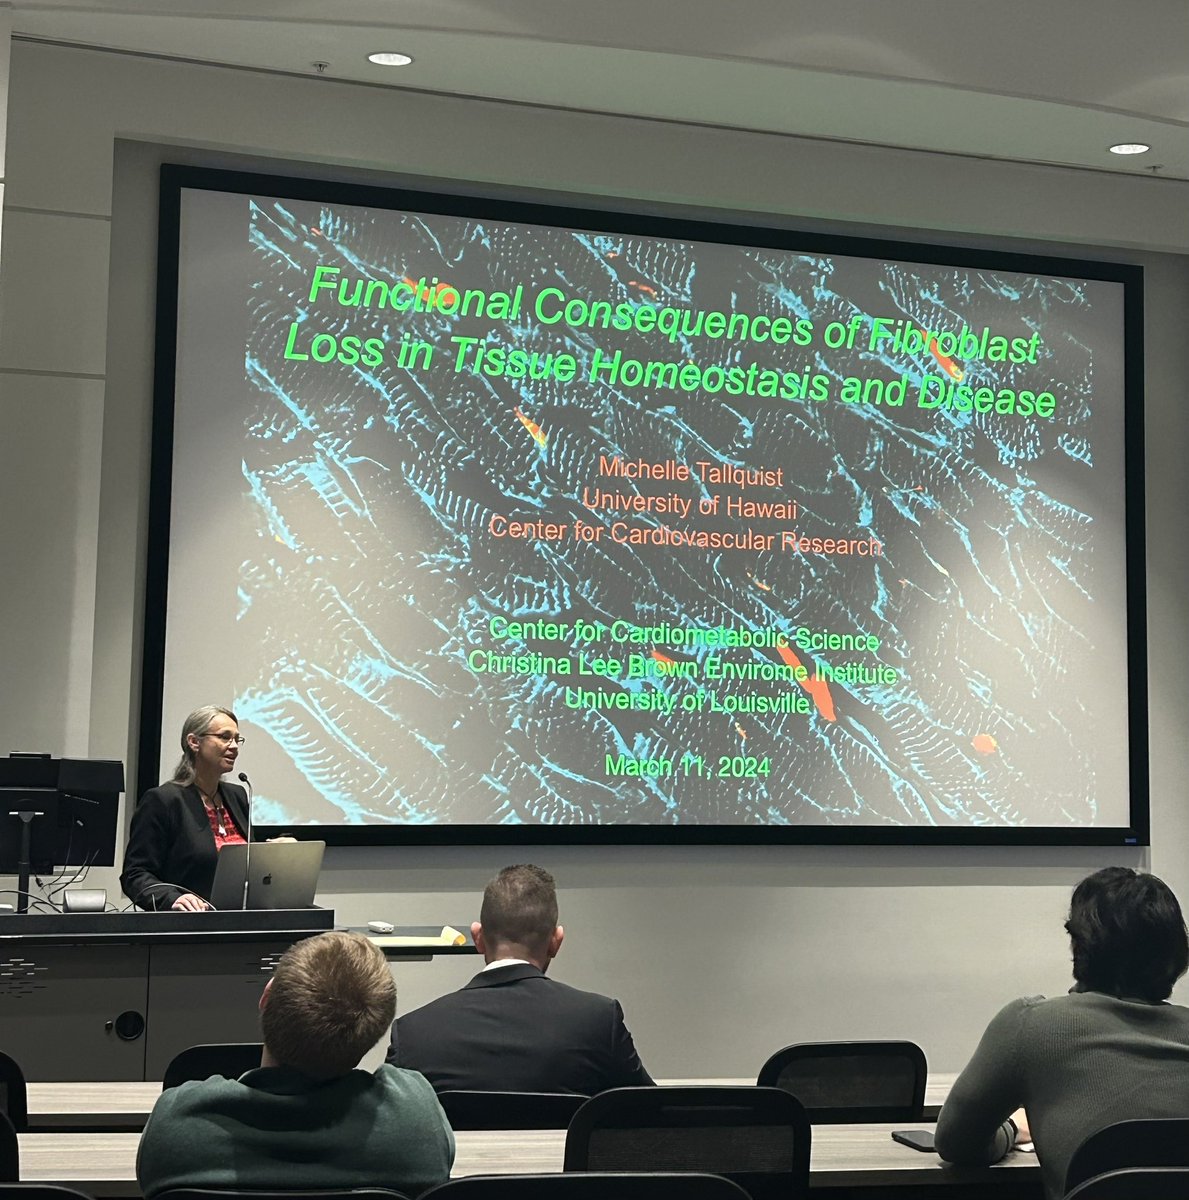 The Center welcomes Prof. Michelle Tallquist from the University of Hawaii. She will deliver the first Center Spotlight Presentation this morning on “Functional Consequences of Fibroblast Loss in Tissue Homeostasis and Disease”.